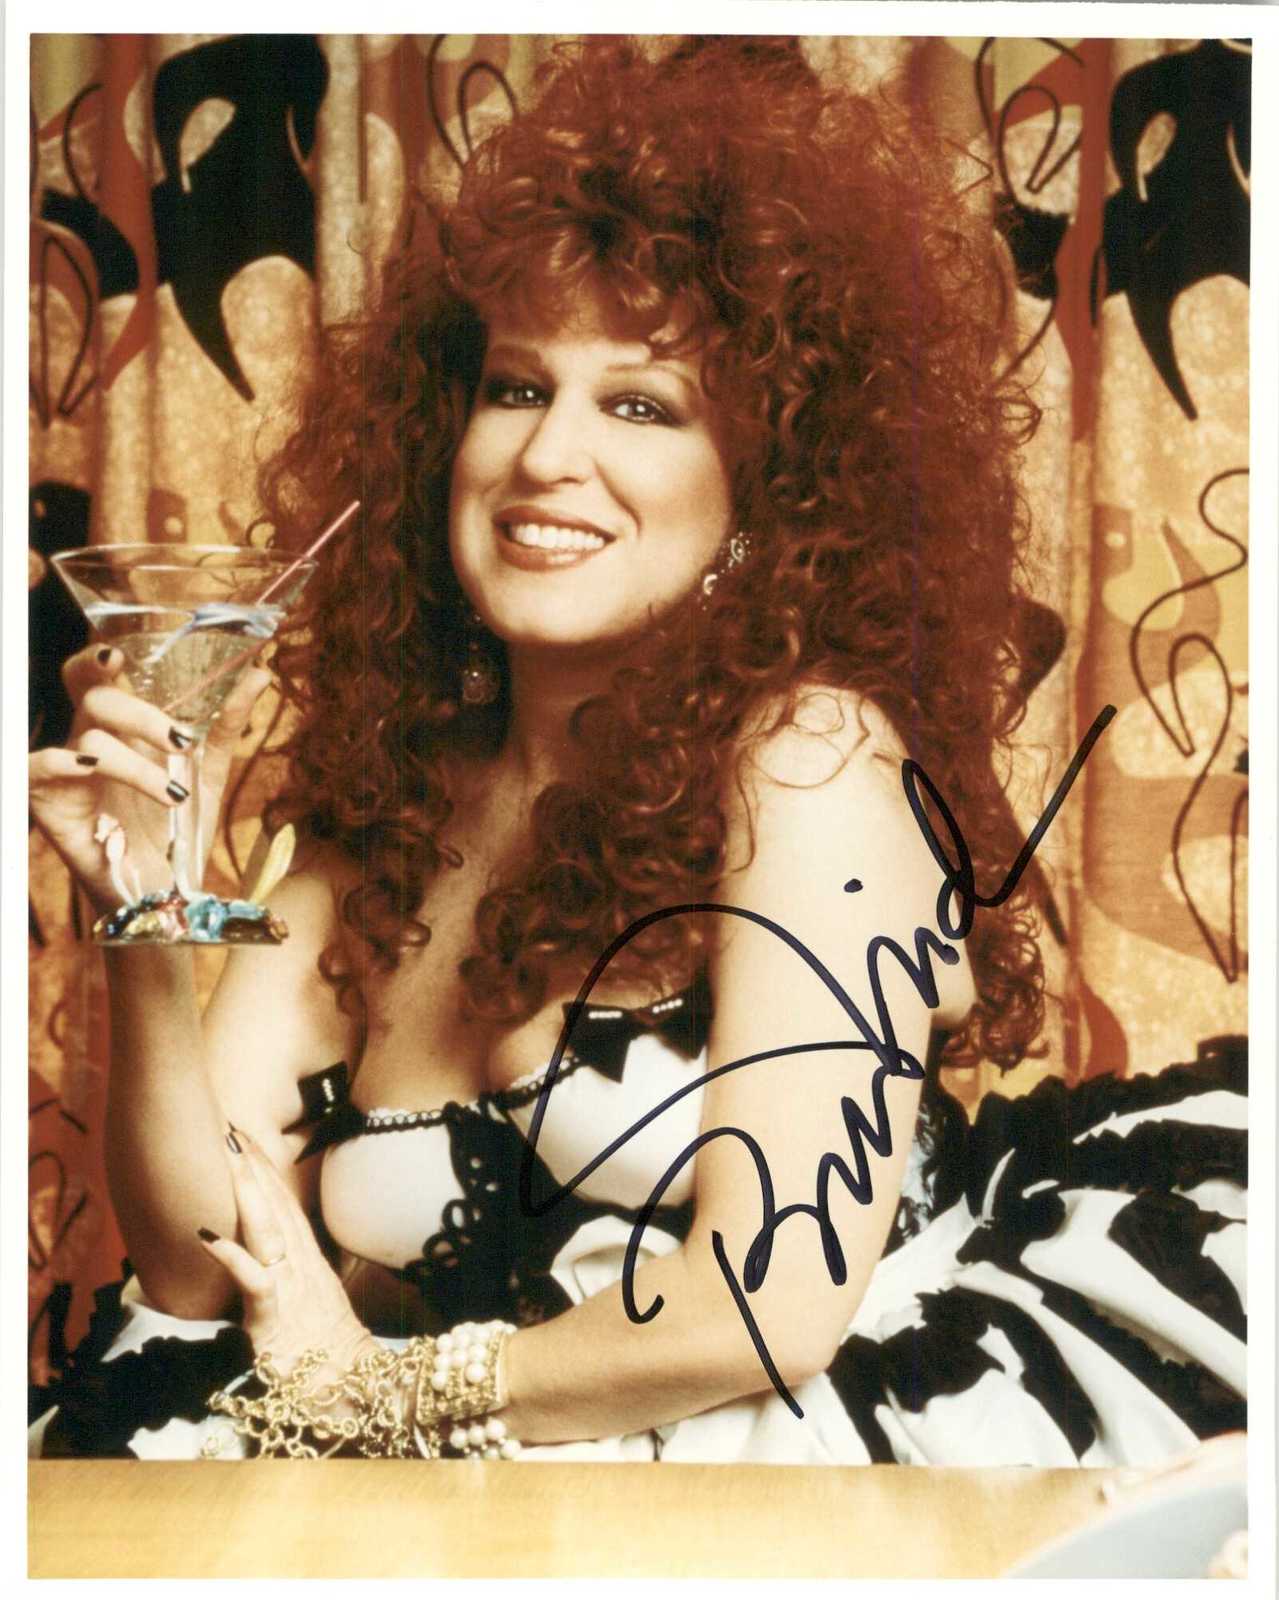 Bette Midler Signed Autographed Glossy 8x10 and 50 similar i